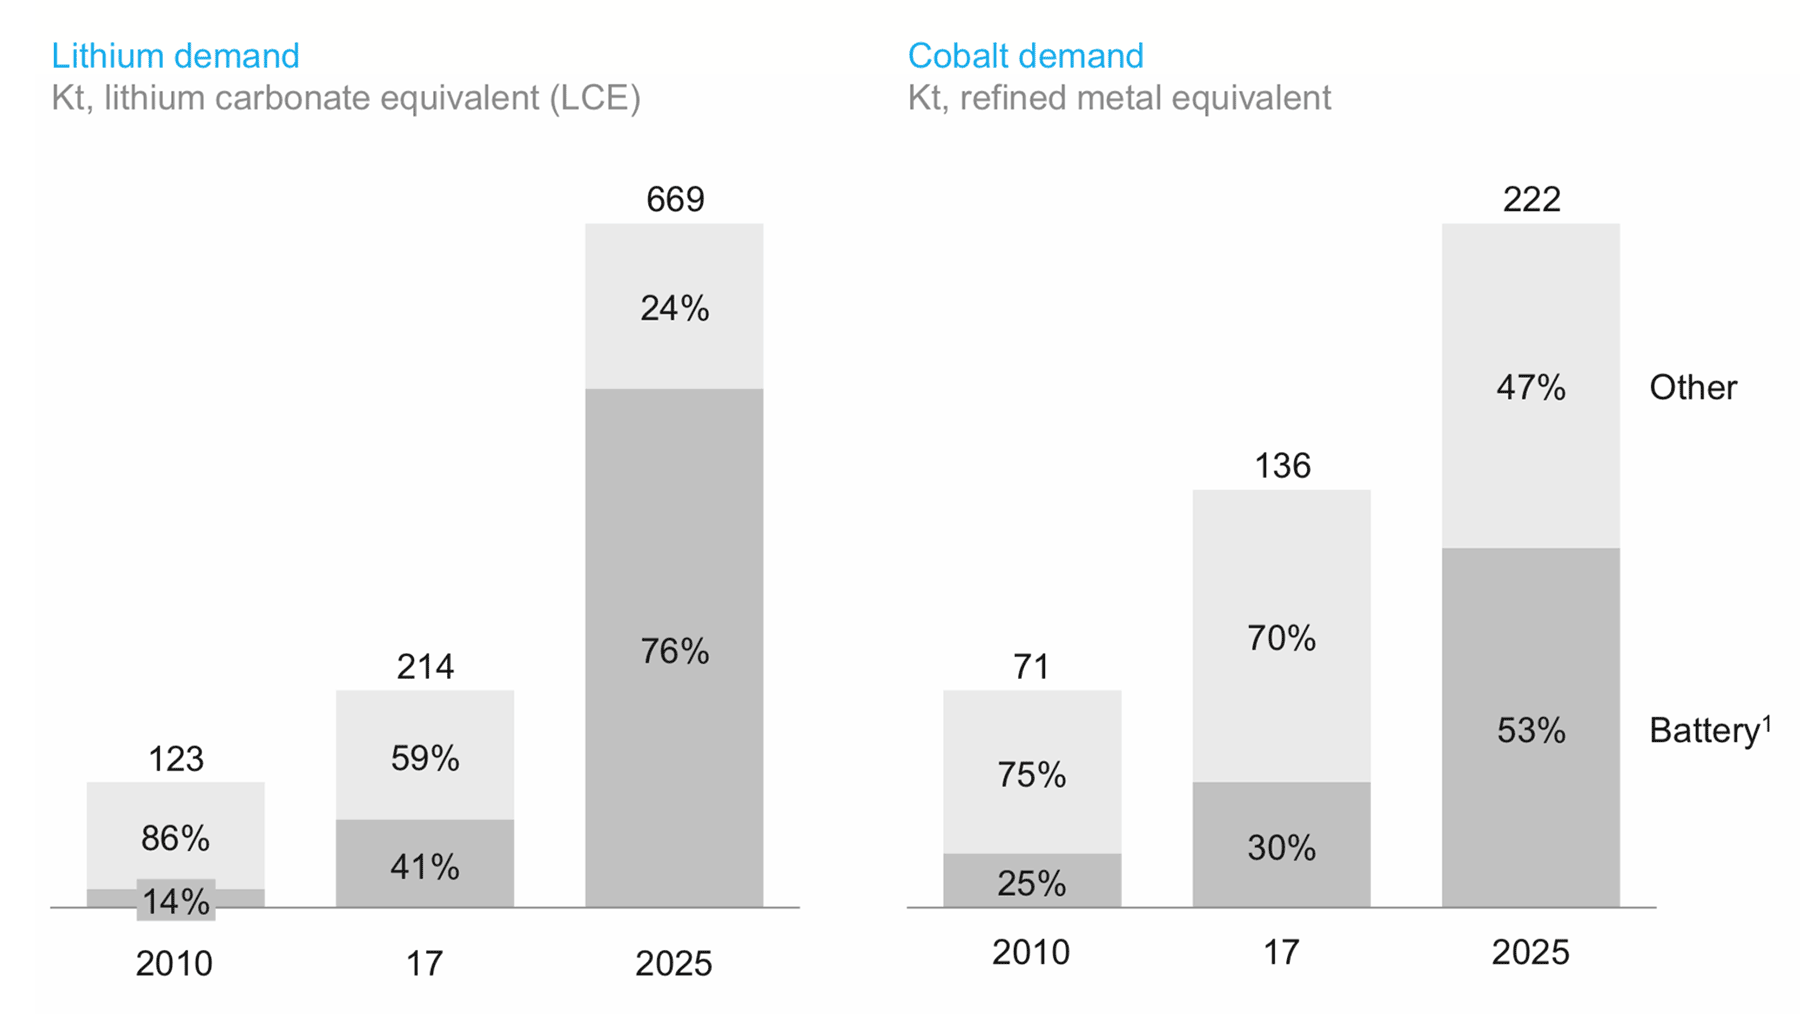 Lithium and cobalt demand evolution split by battery and other applications - Source: McKinsey